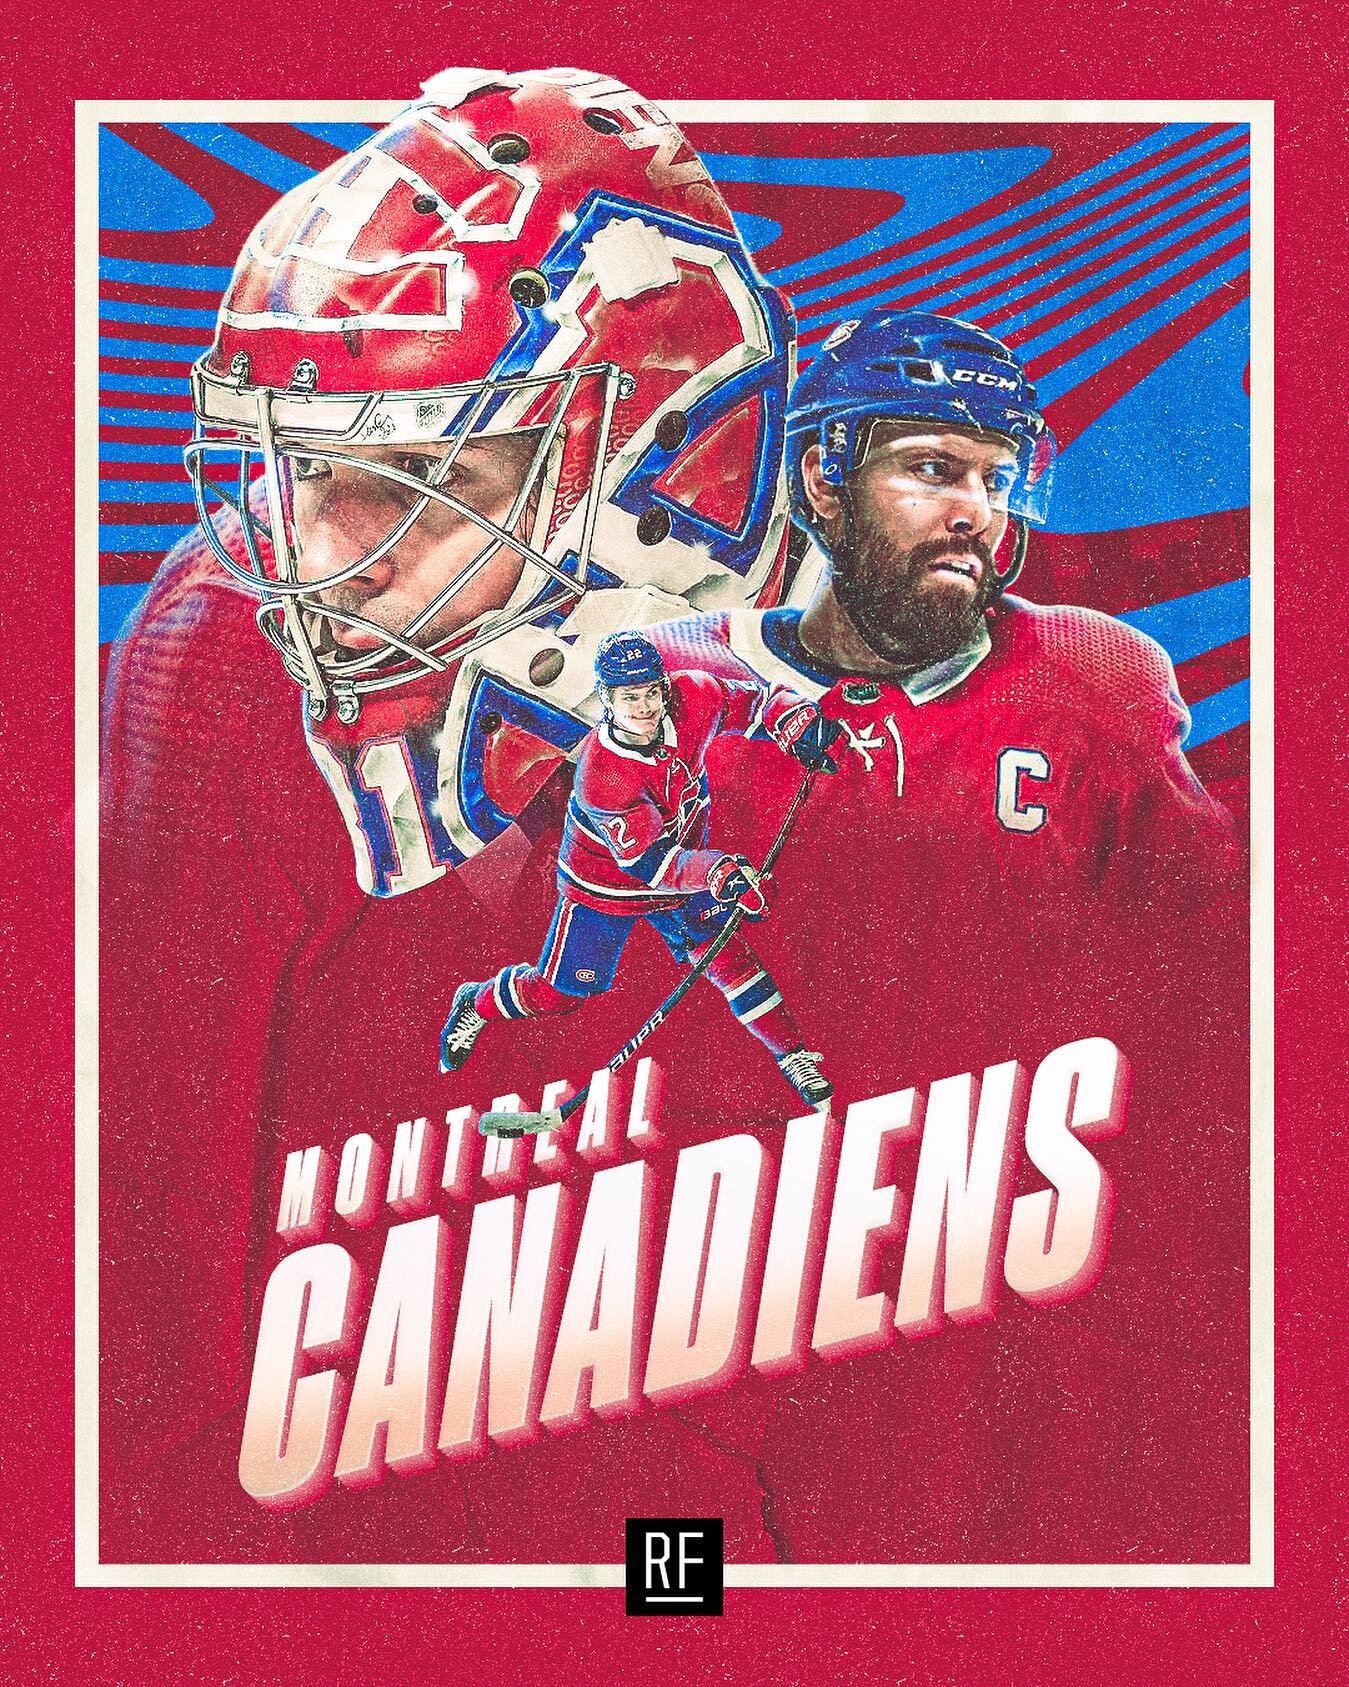 The Montreal Canadiens beat the Vegas Golden Knights in the Semis to go to the Stanley Cup Final just as we all predicted last year. Nope not weird at all. #canadiens #gohabsgo #montreal #montr&eacute;al #nhl #stanleycup #playoffs @nhl @canadiensmtl 